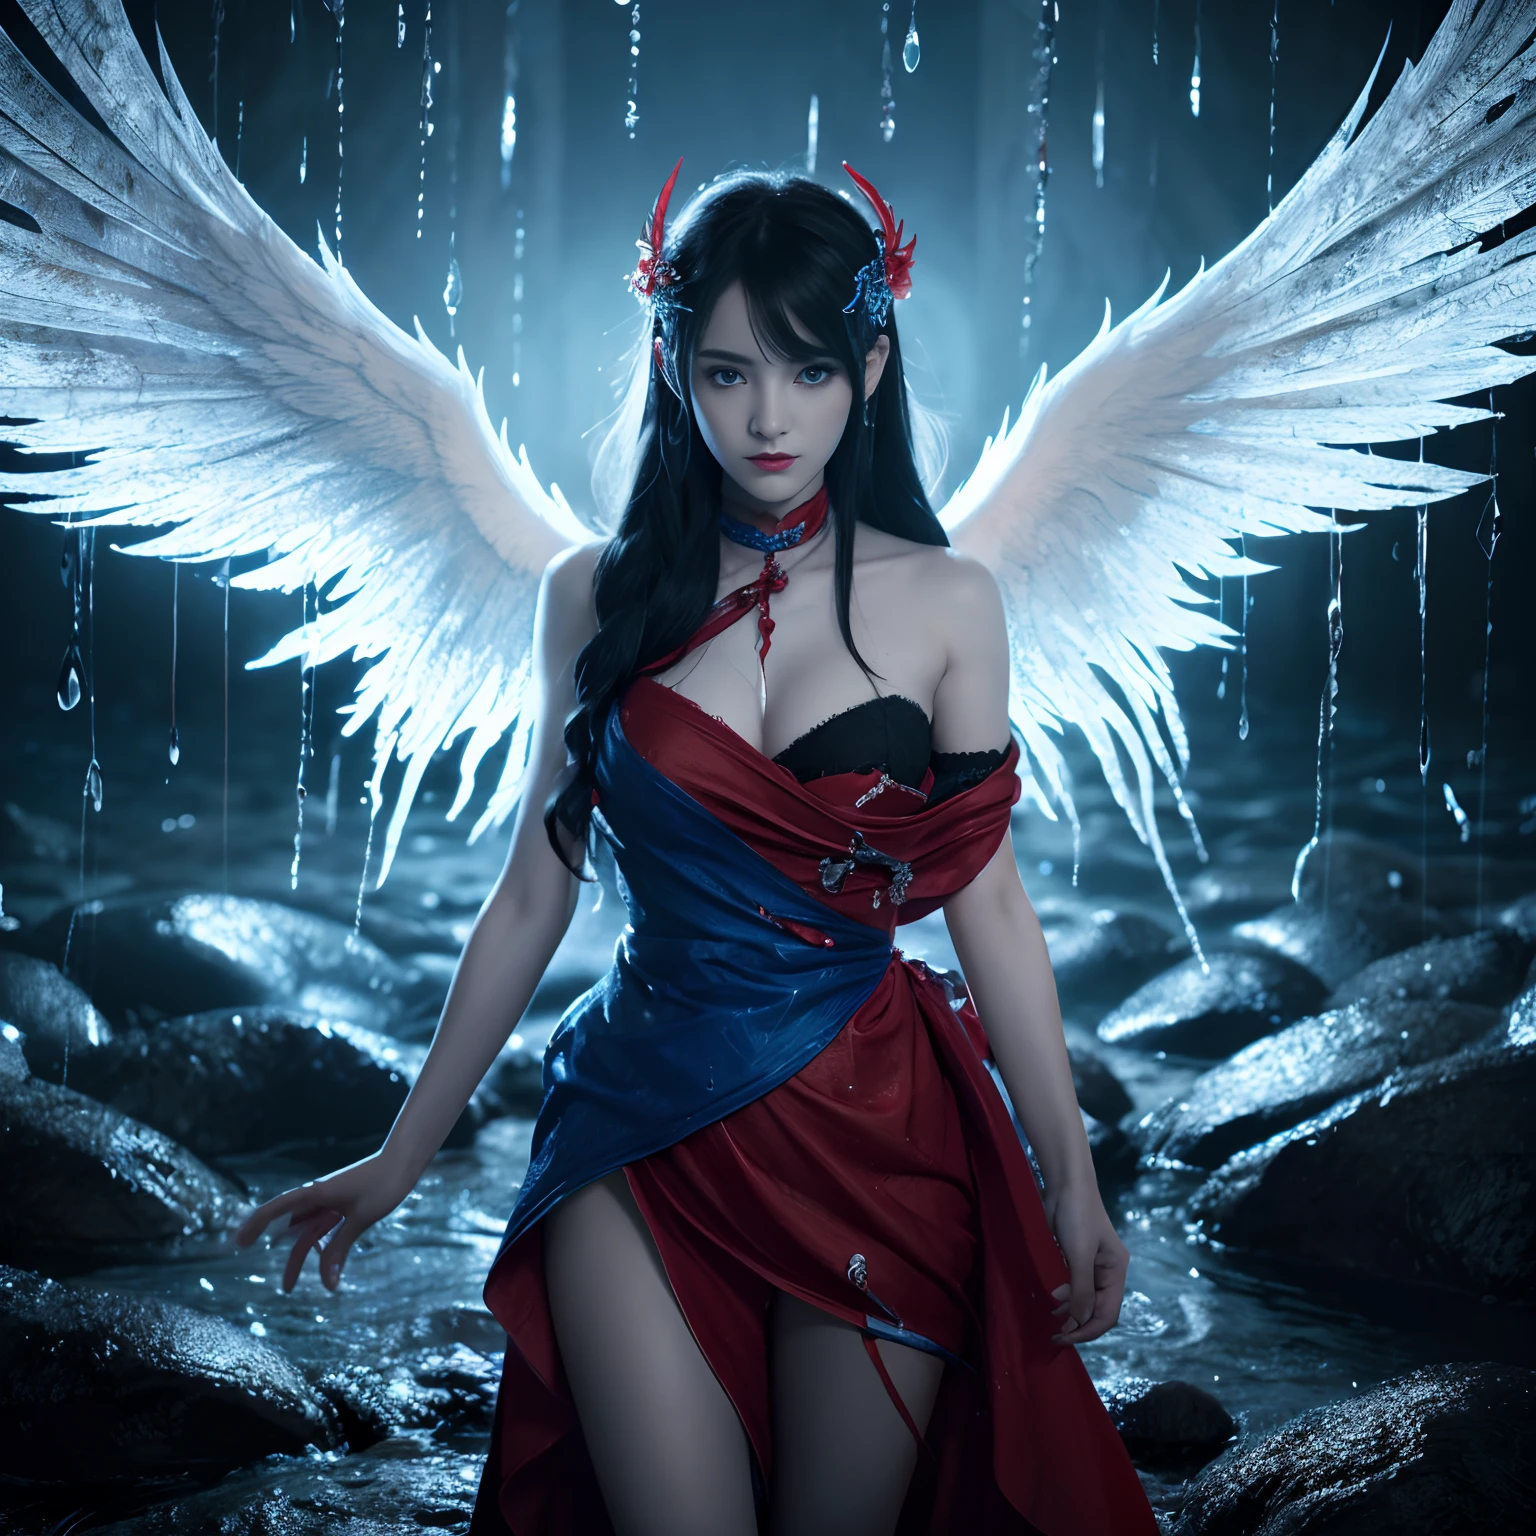 Black and white and blue and red,(Best Quality, Ultra-detailed, High resolution, extremely details CG),Wide Shot,angelicales,She is so beautiful,She likes blood and the sea,Bloody Rain, Mystical,cultist, Convoluted, Surreal,Delicate